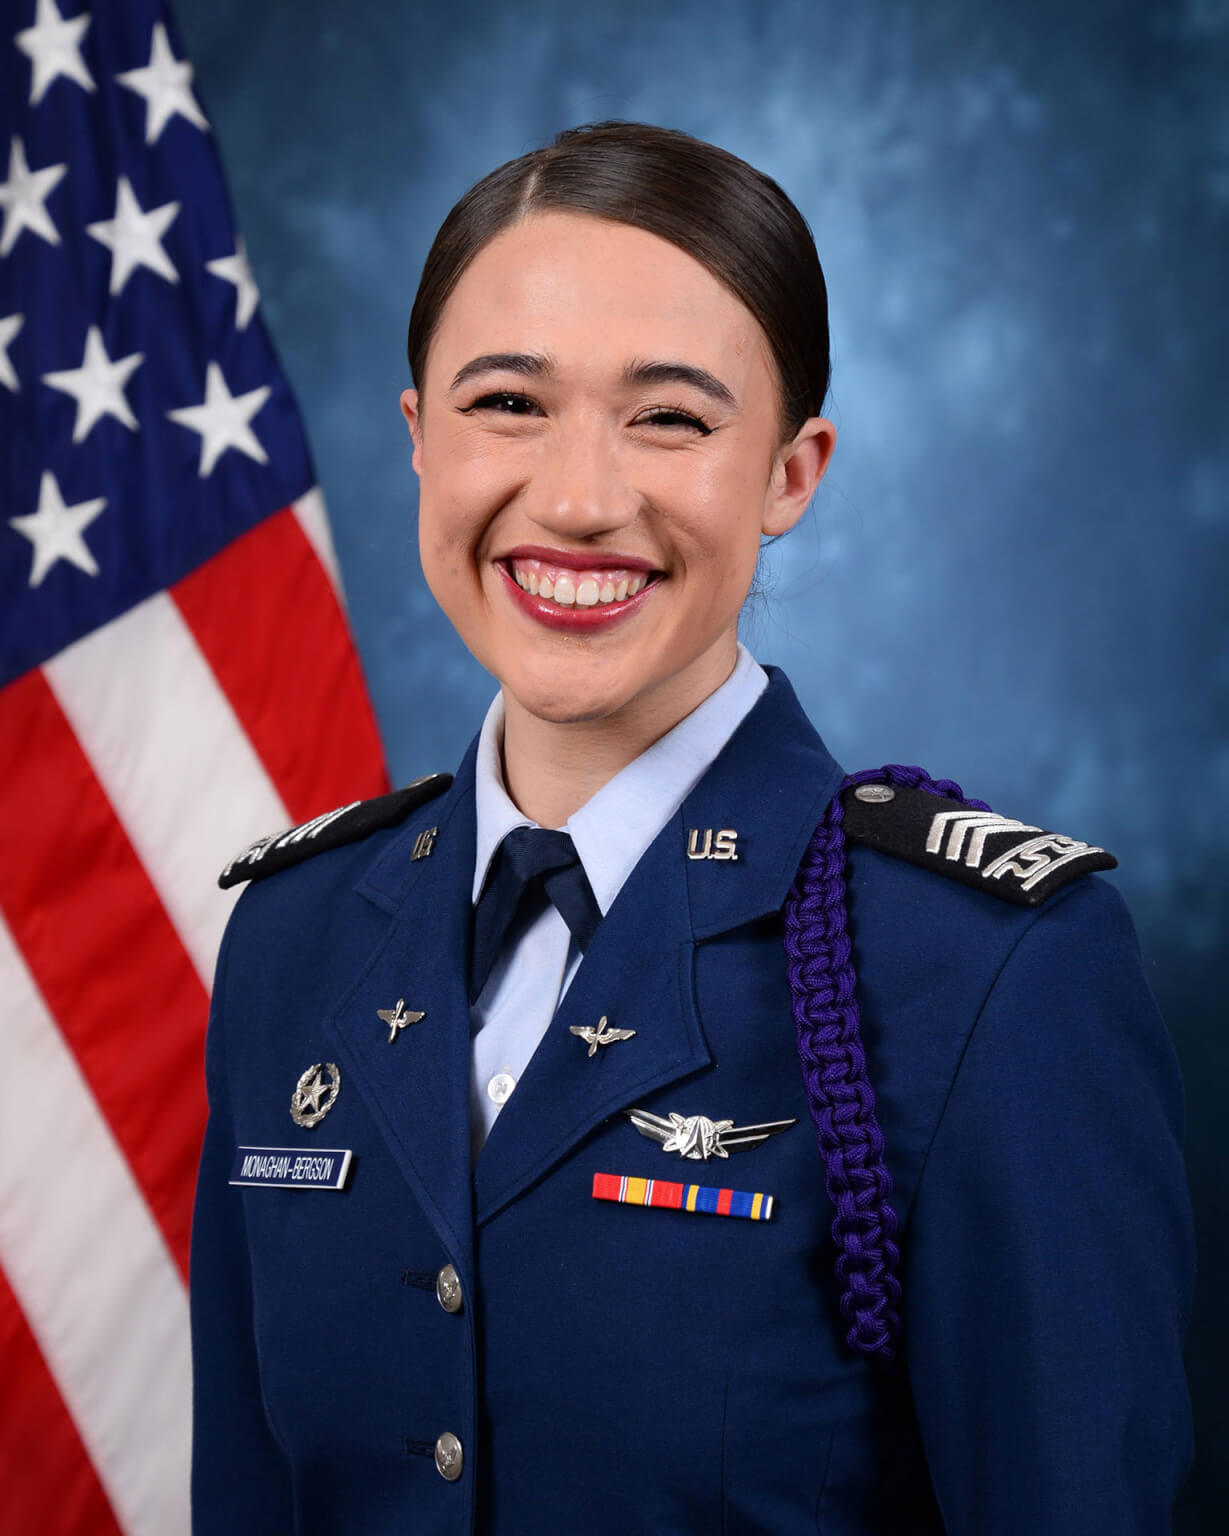 Cadet 2nd Class Kelsey Monaghan-Bergson, a junior at the U.S. Air Force Academy.